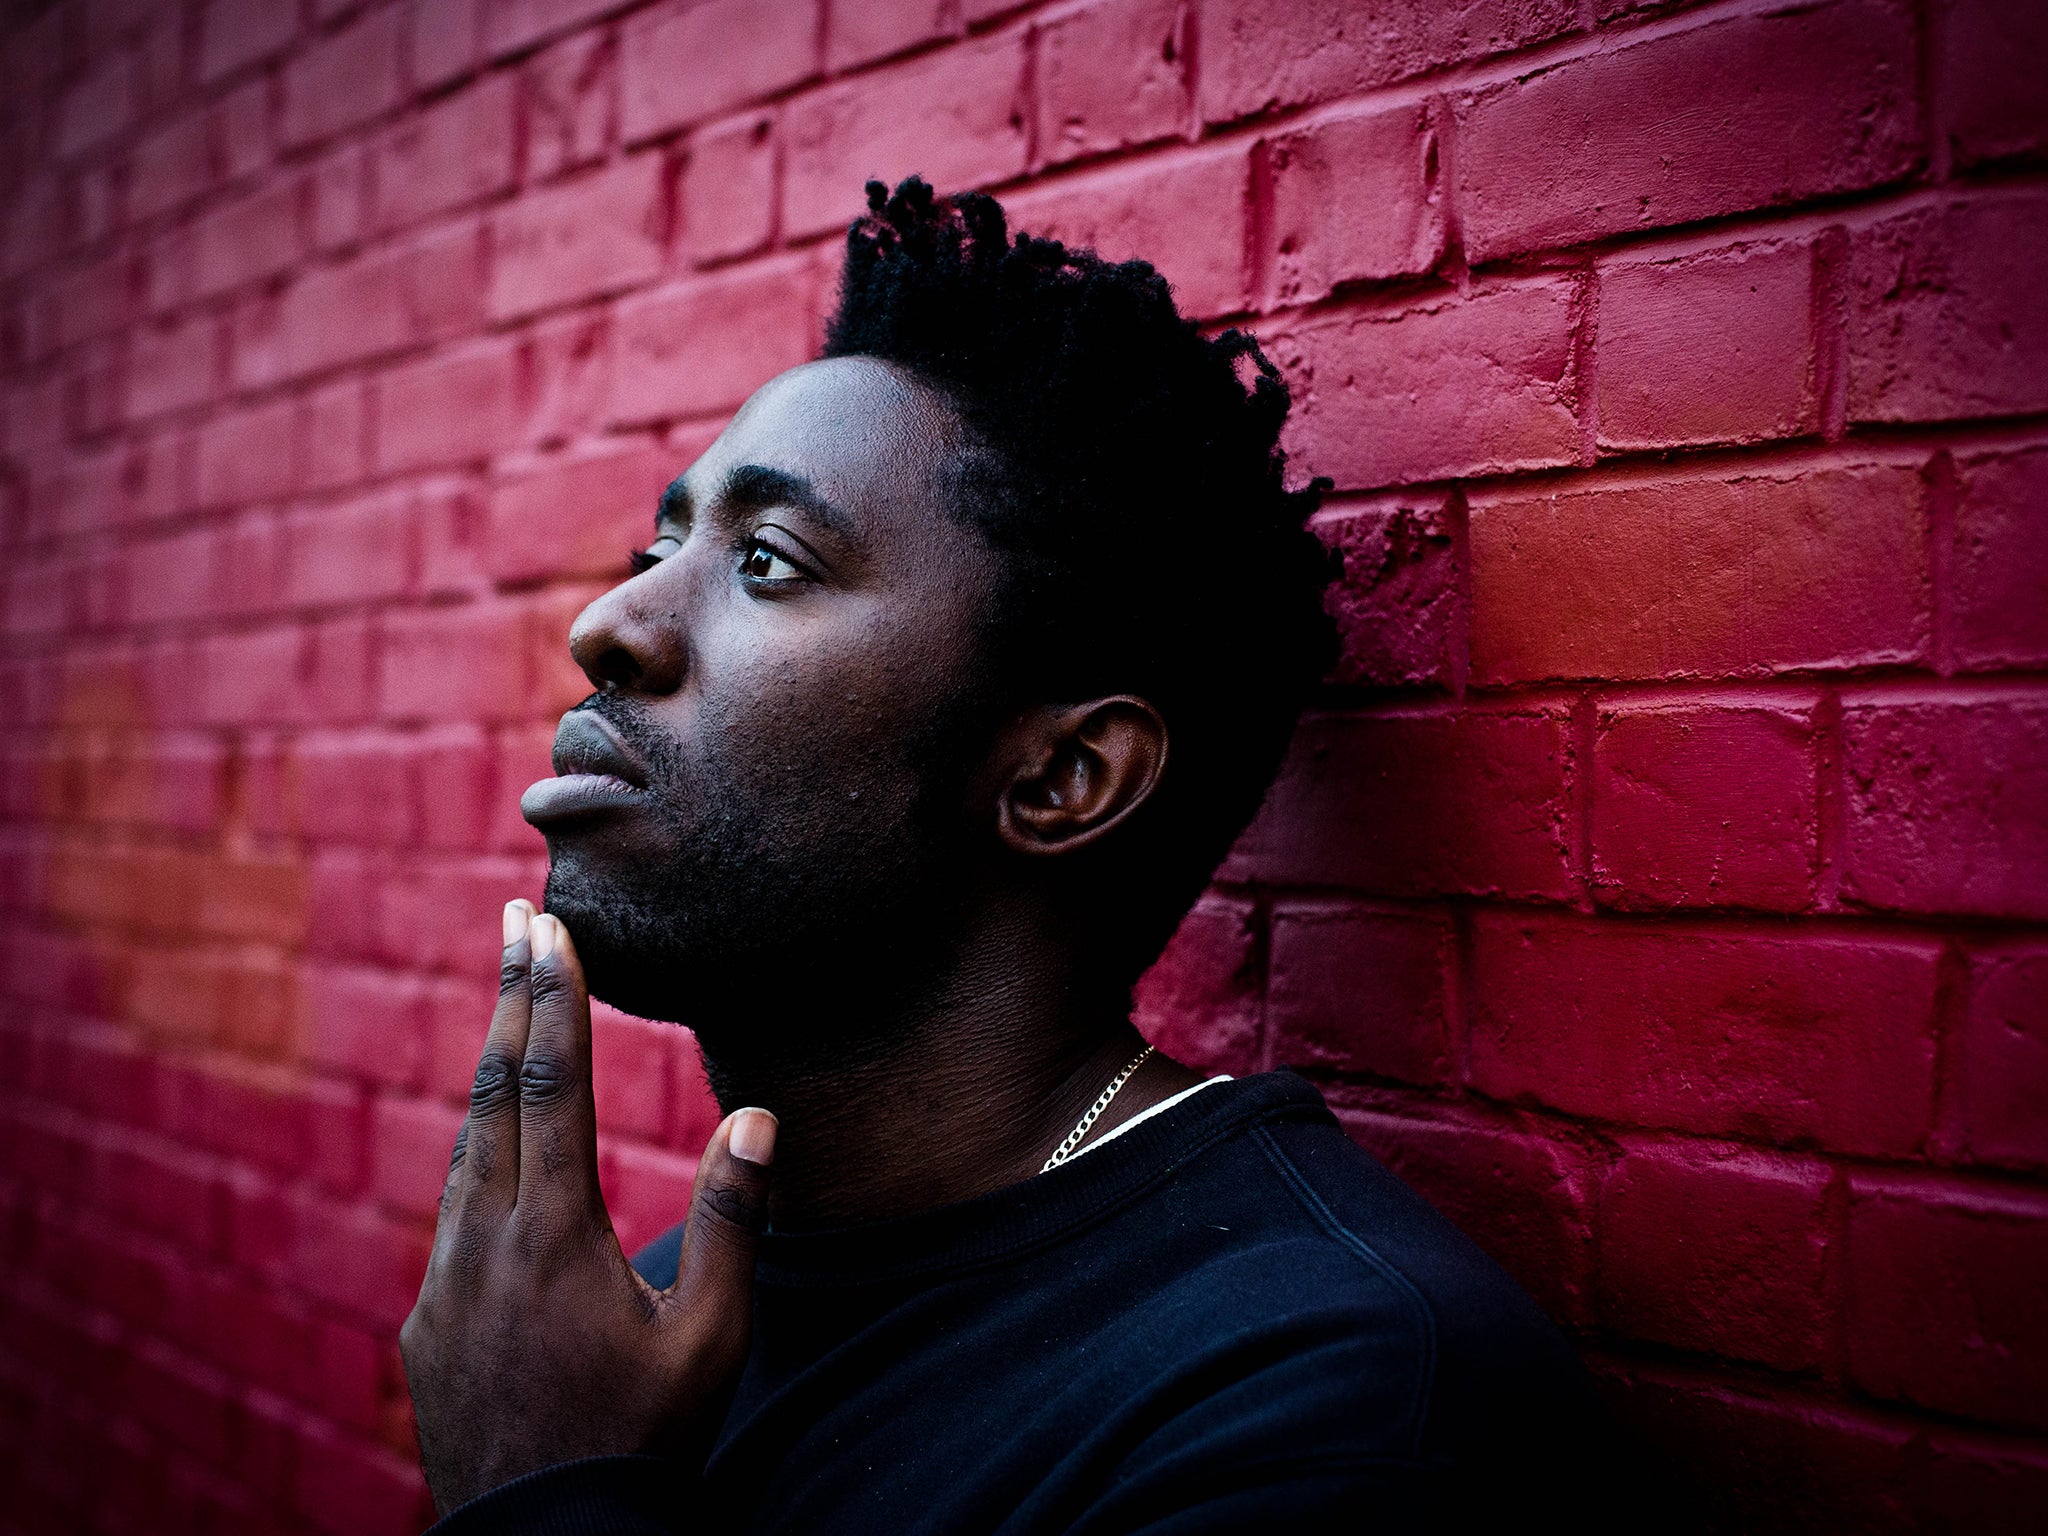 Kele Okereke, the lead singer and rhythm guitarist of the indie rock band Bloc Party